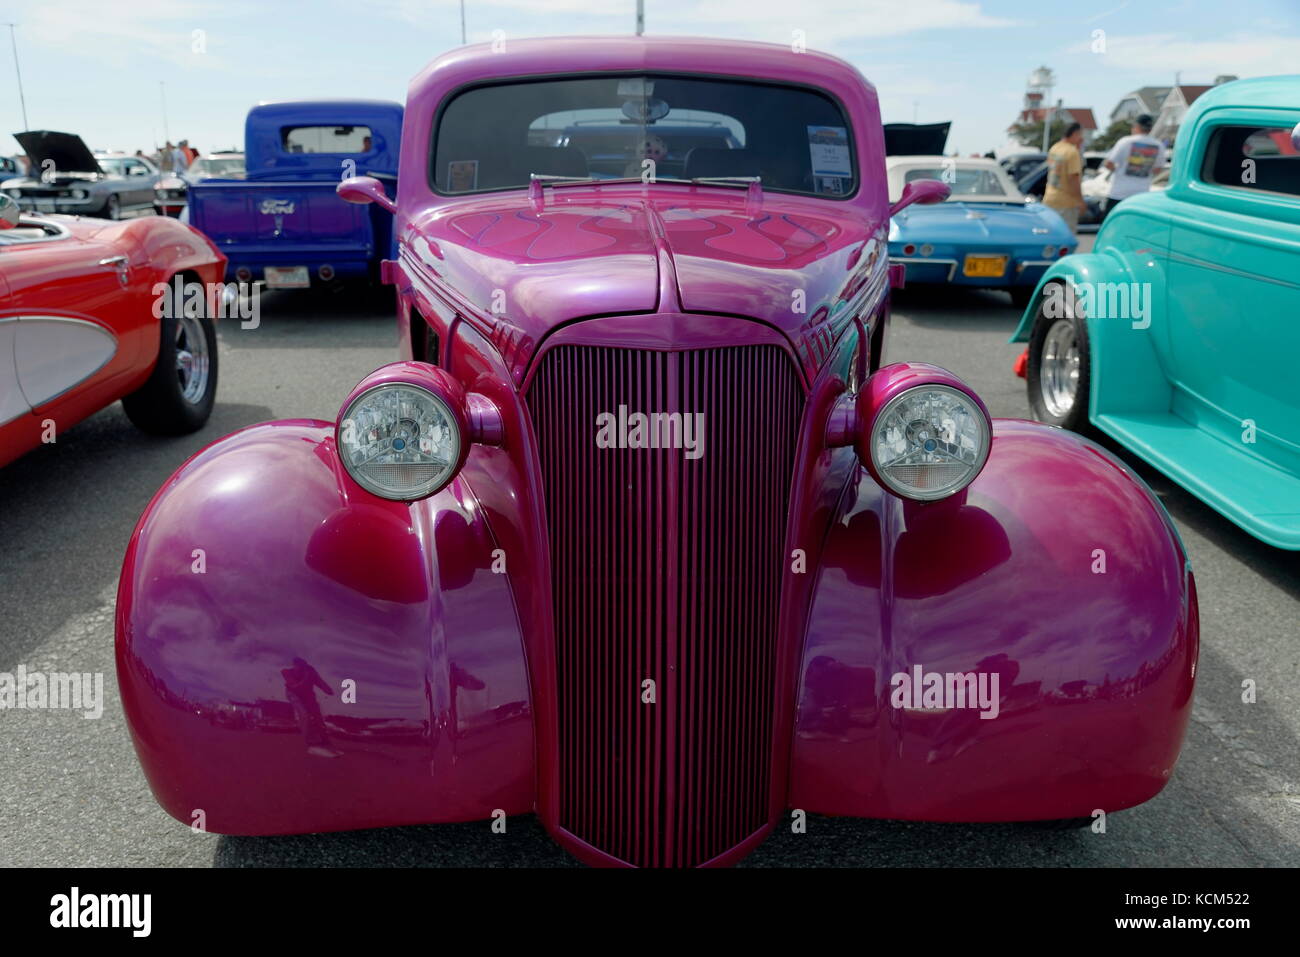 A magenta colored roadster  on display at the annual  Endless Summer Cruisin, Ocean City, Maryland, USA. Stock Photo